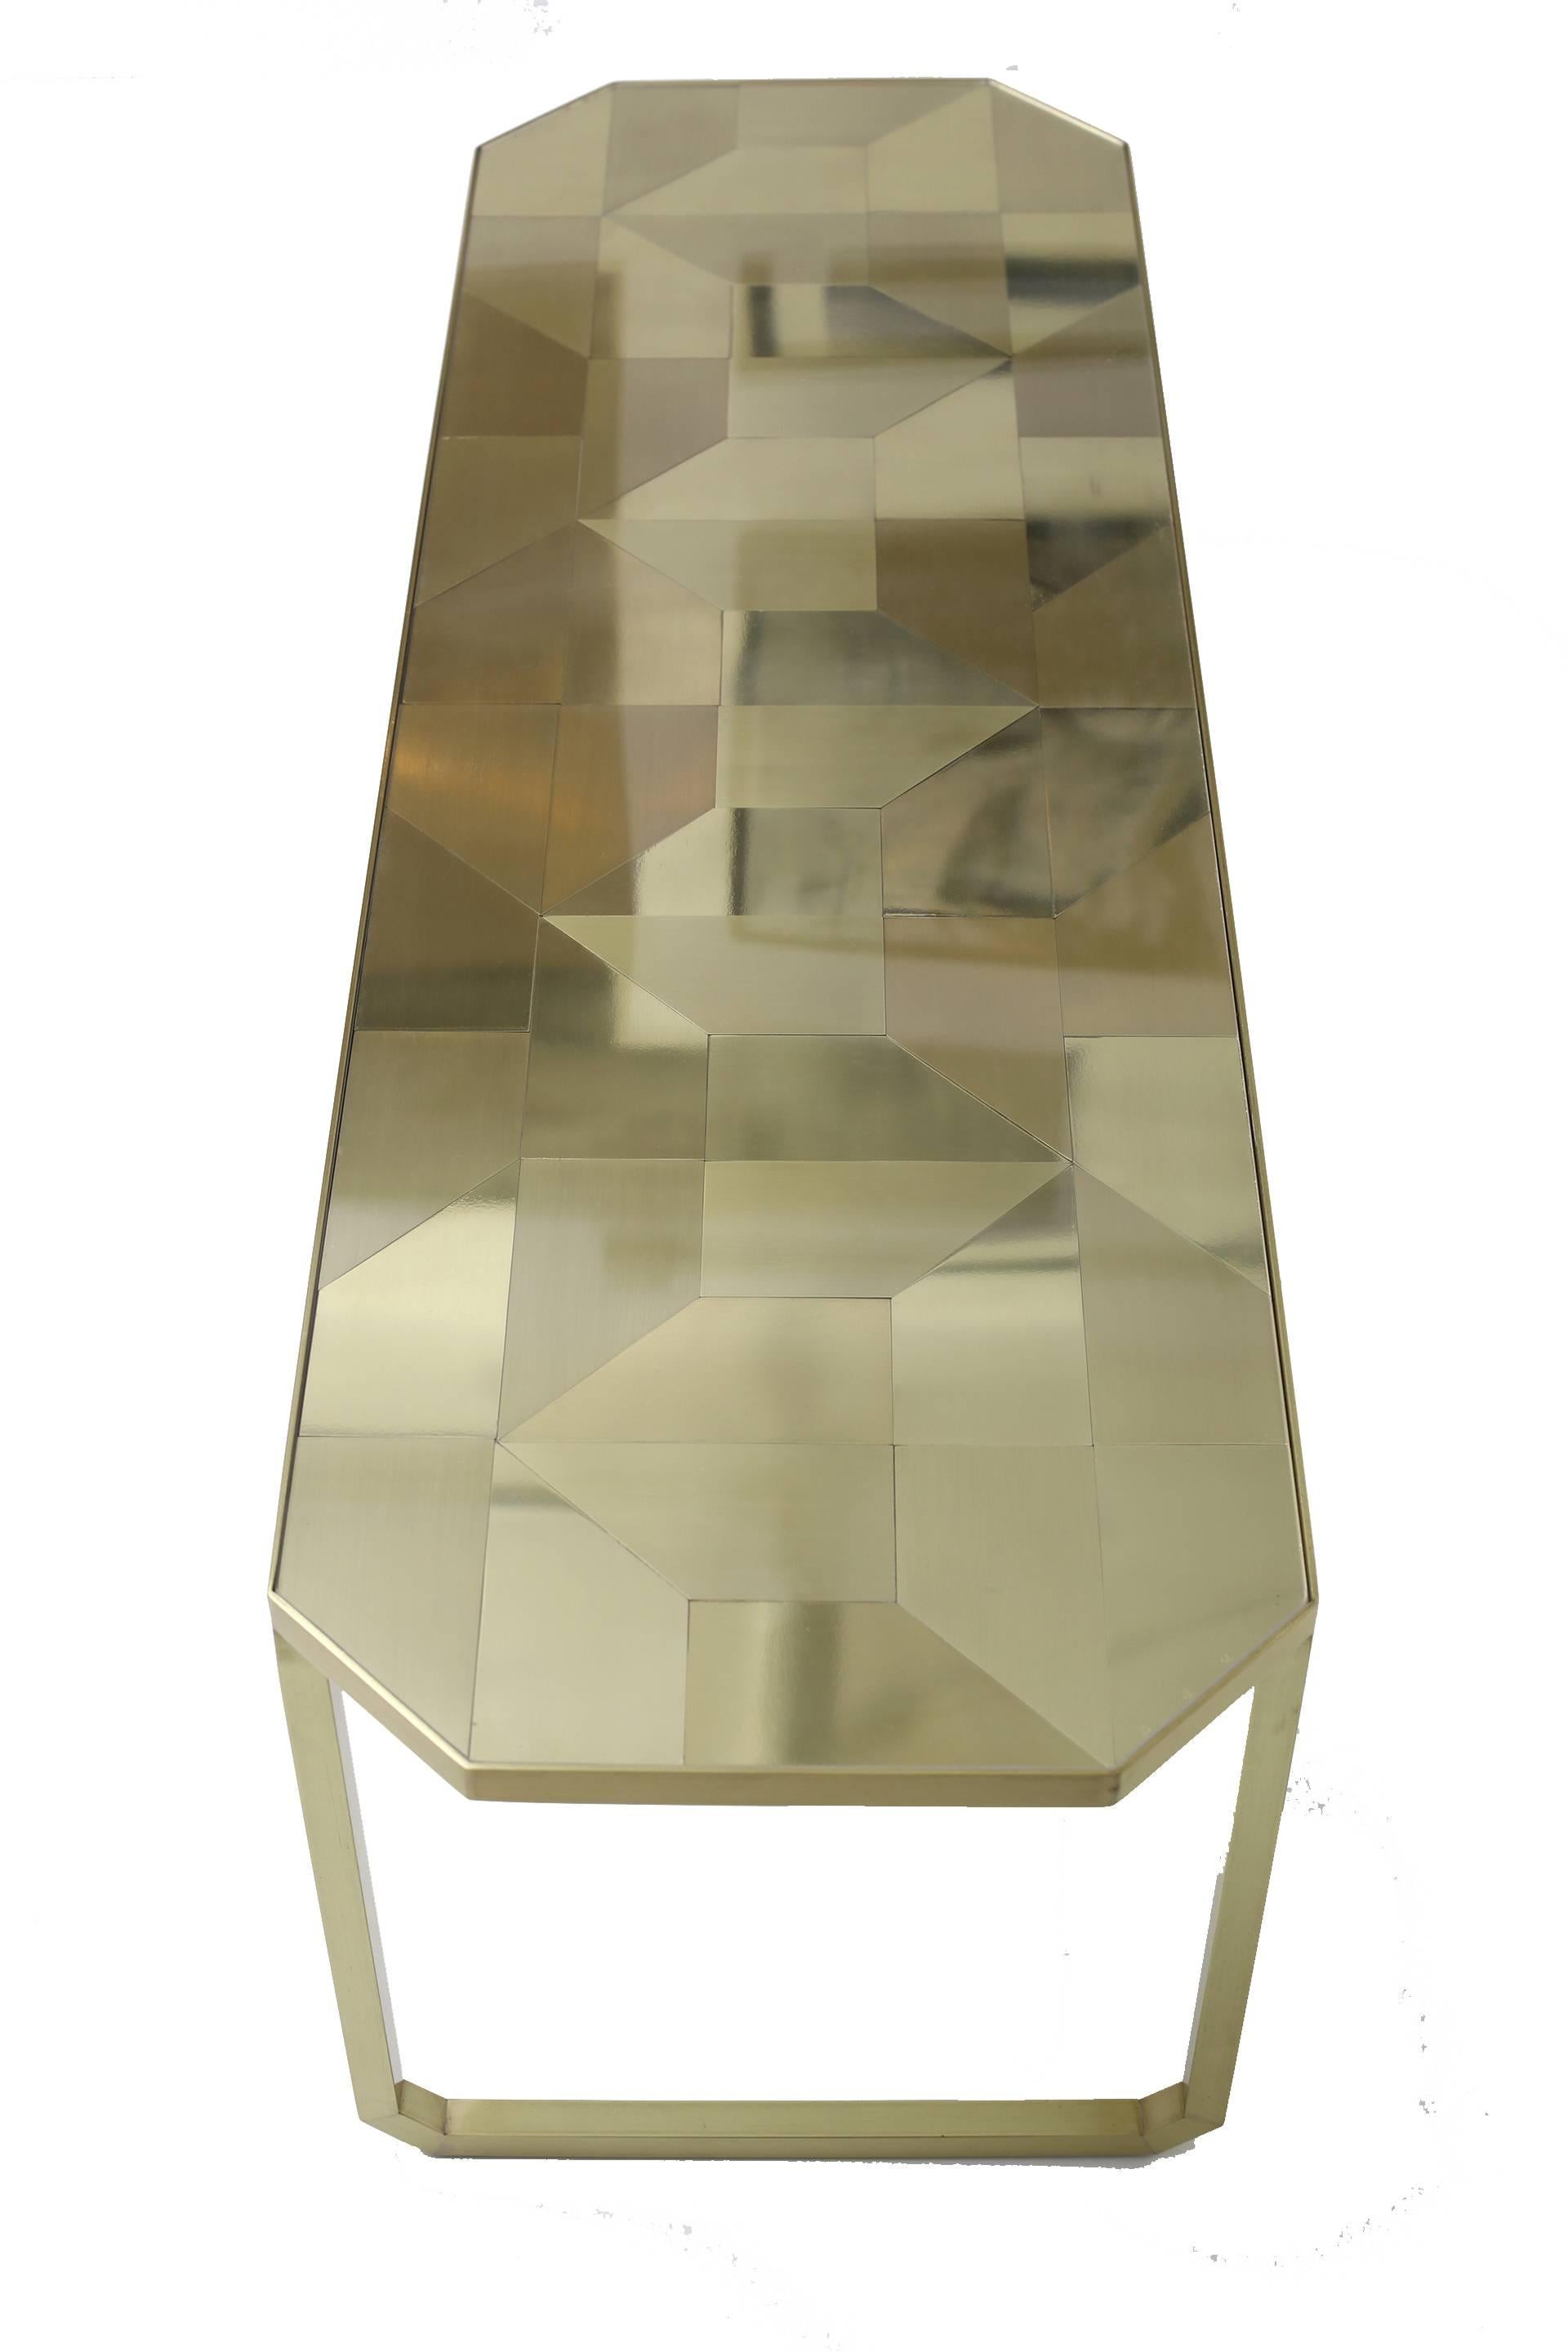 This brass coffee table is from the Tramas series, made in the Brazilian contemporary style.
Topped with metal geometric tiles (laser cut process), alternating polished and brushed parts highlighting the three-dimensional effect. His inspiration